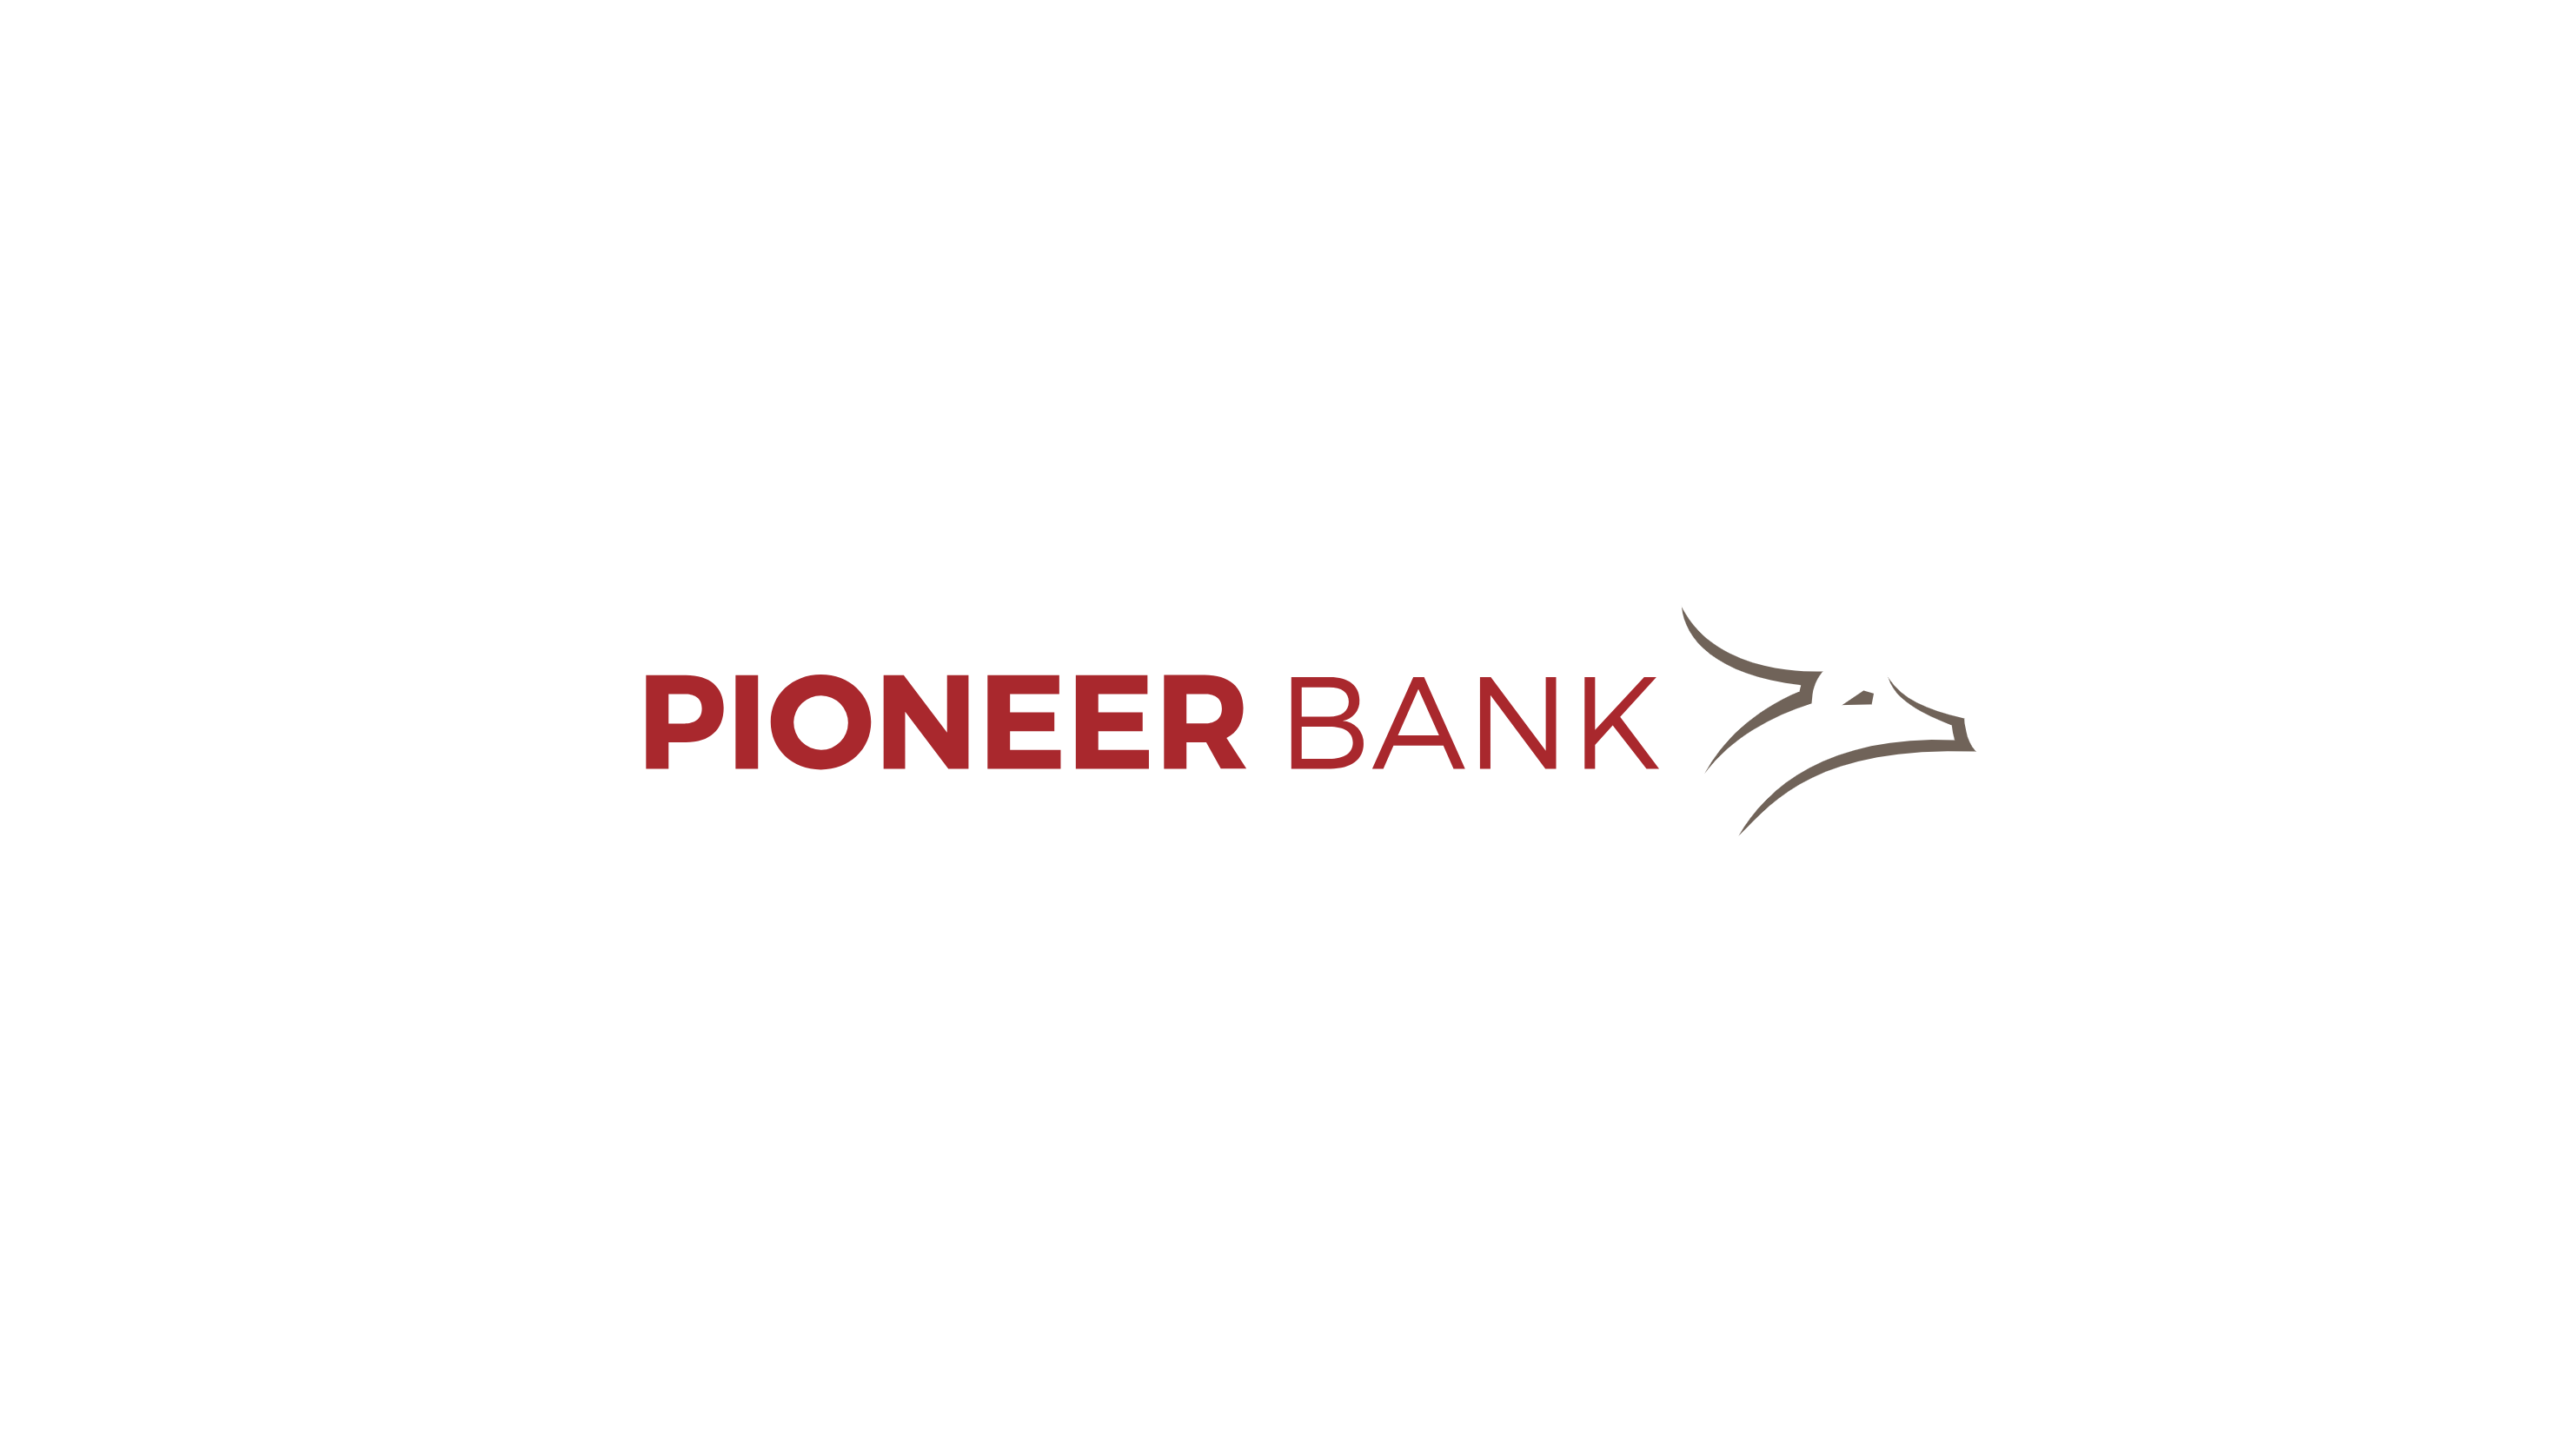 See how to apply online for its loans. Source: Pioneer Bank.